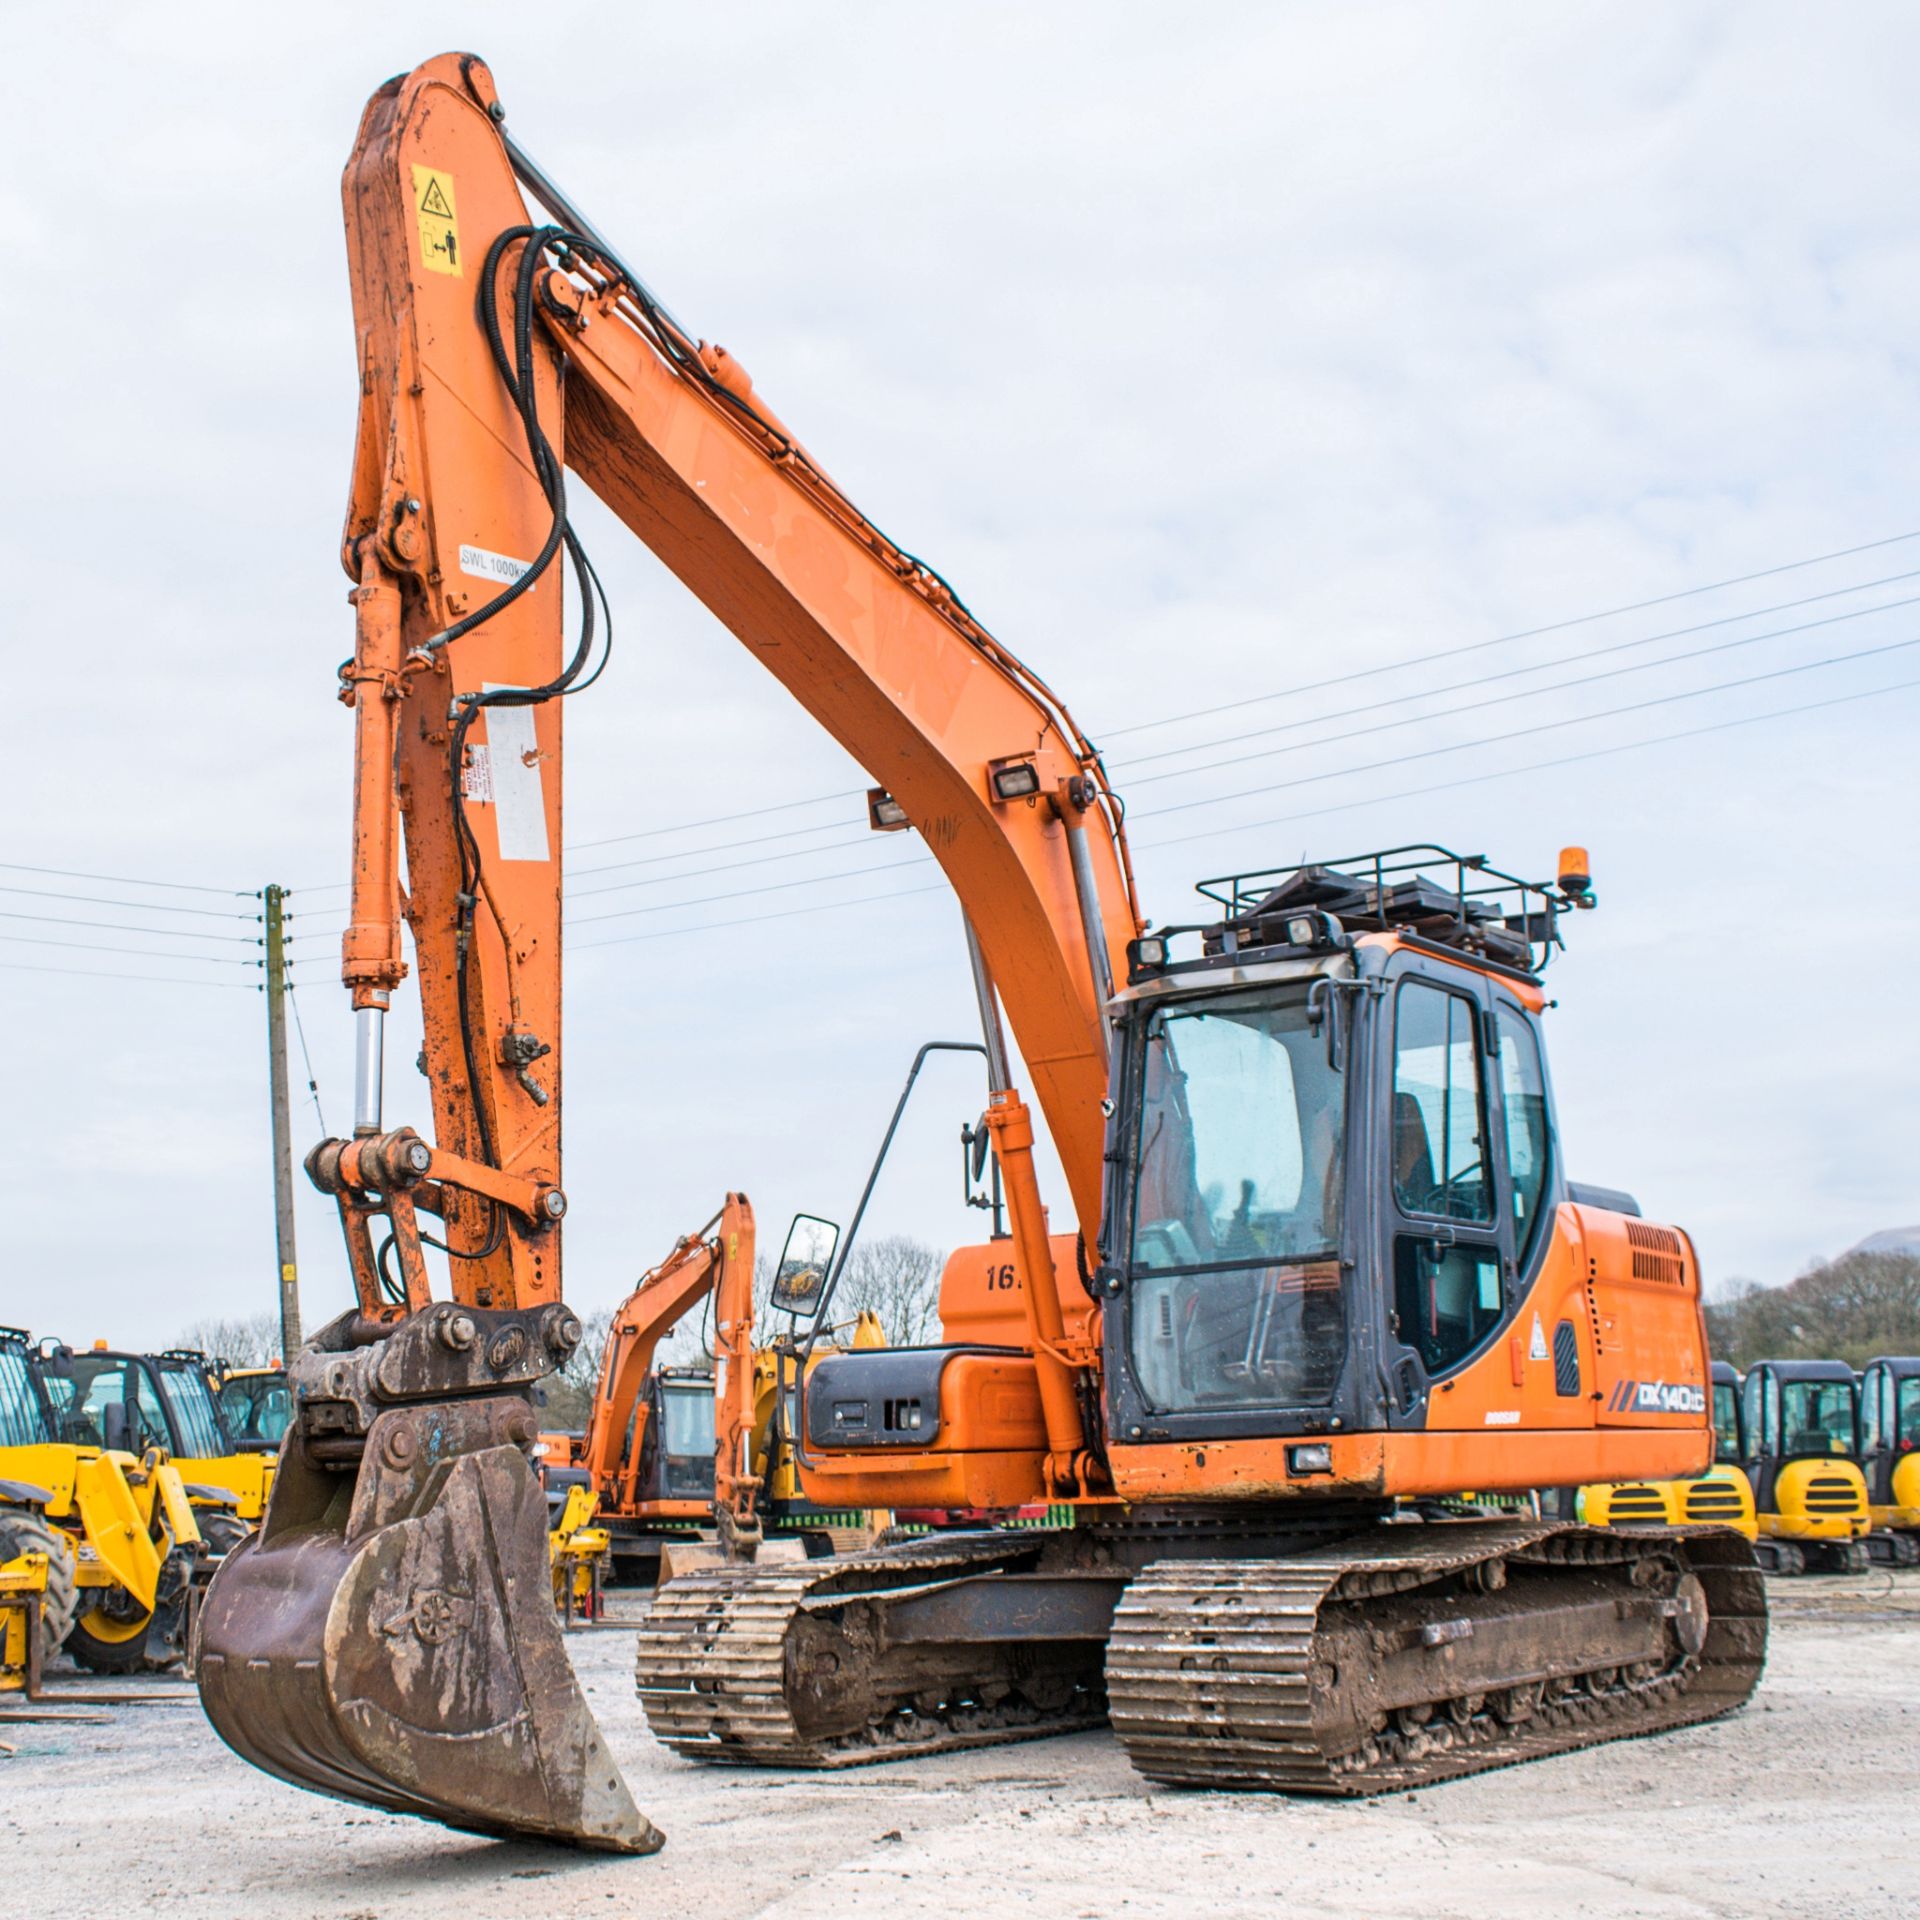 Doosan DX140LC 14 tonne steel tracked excavator Year: S/N: 50793 Recorded Hours: 7430 piped,